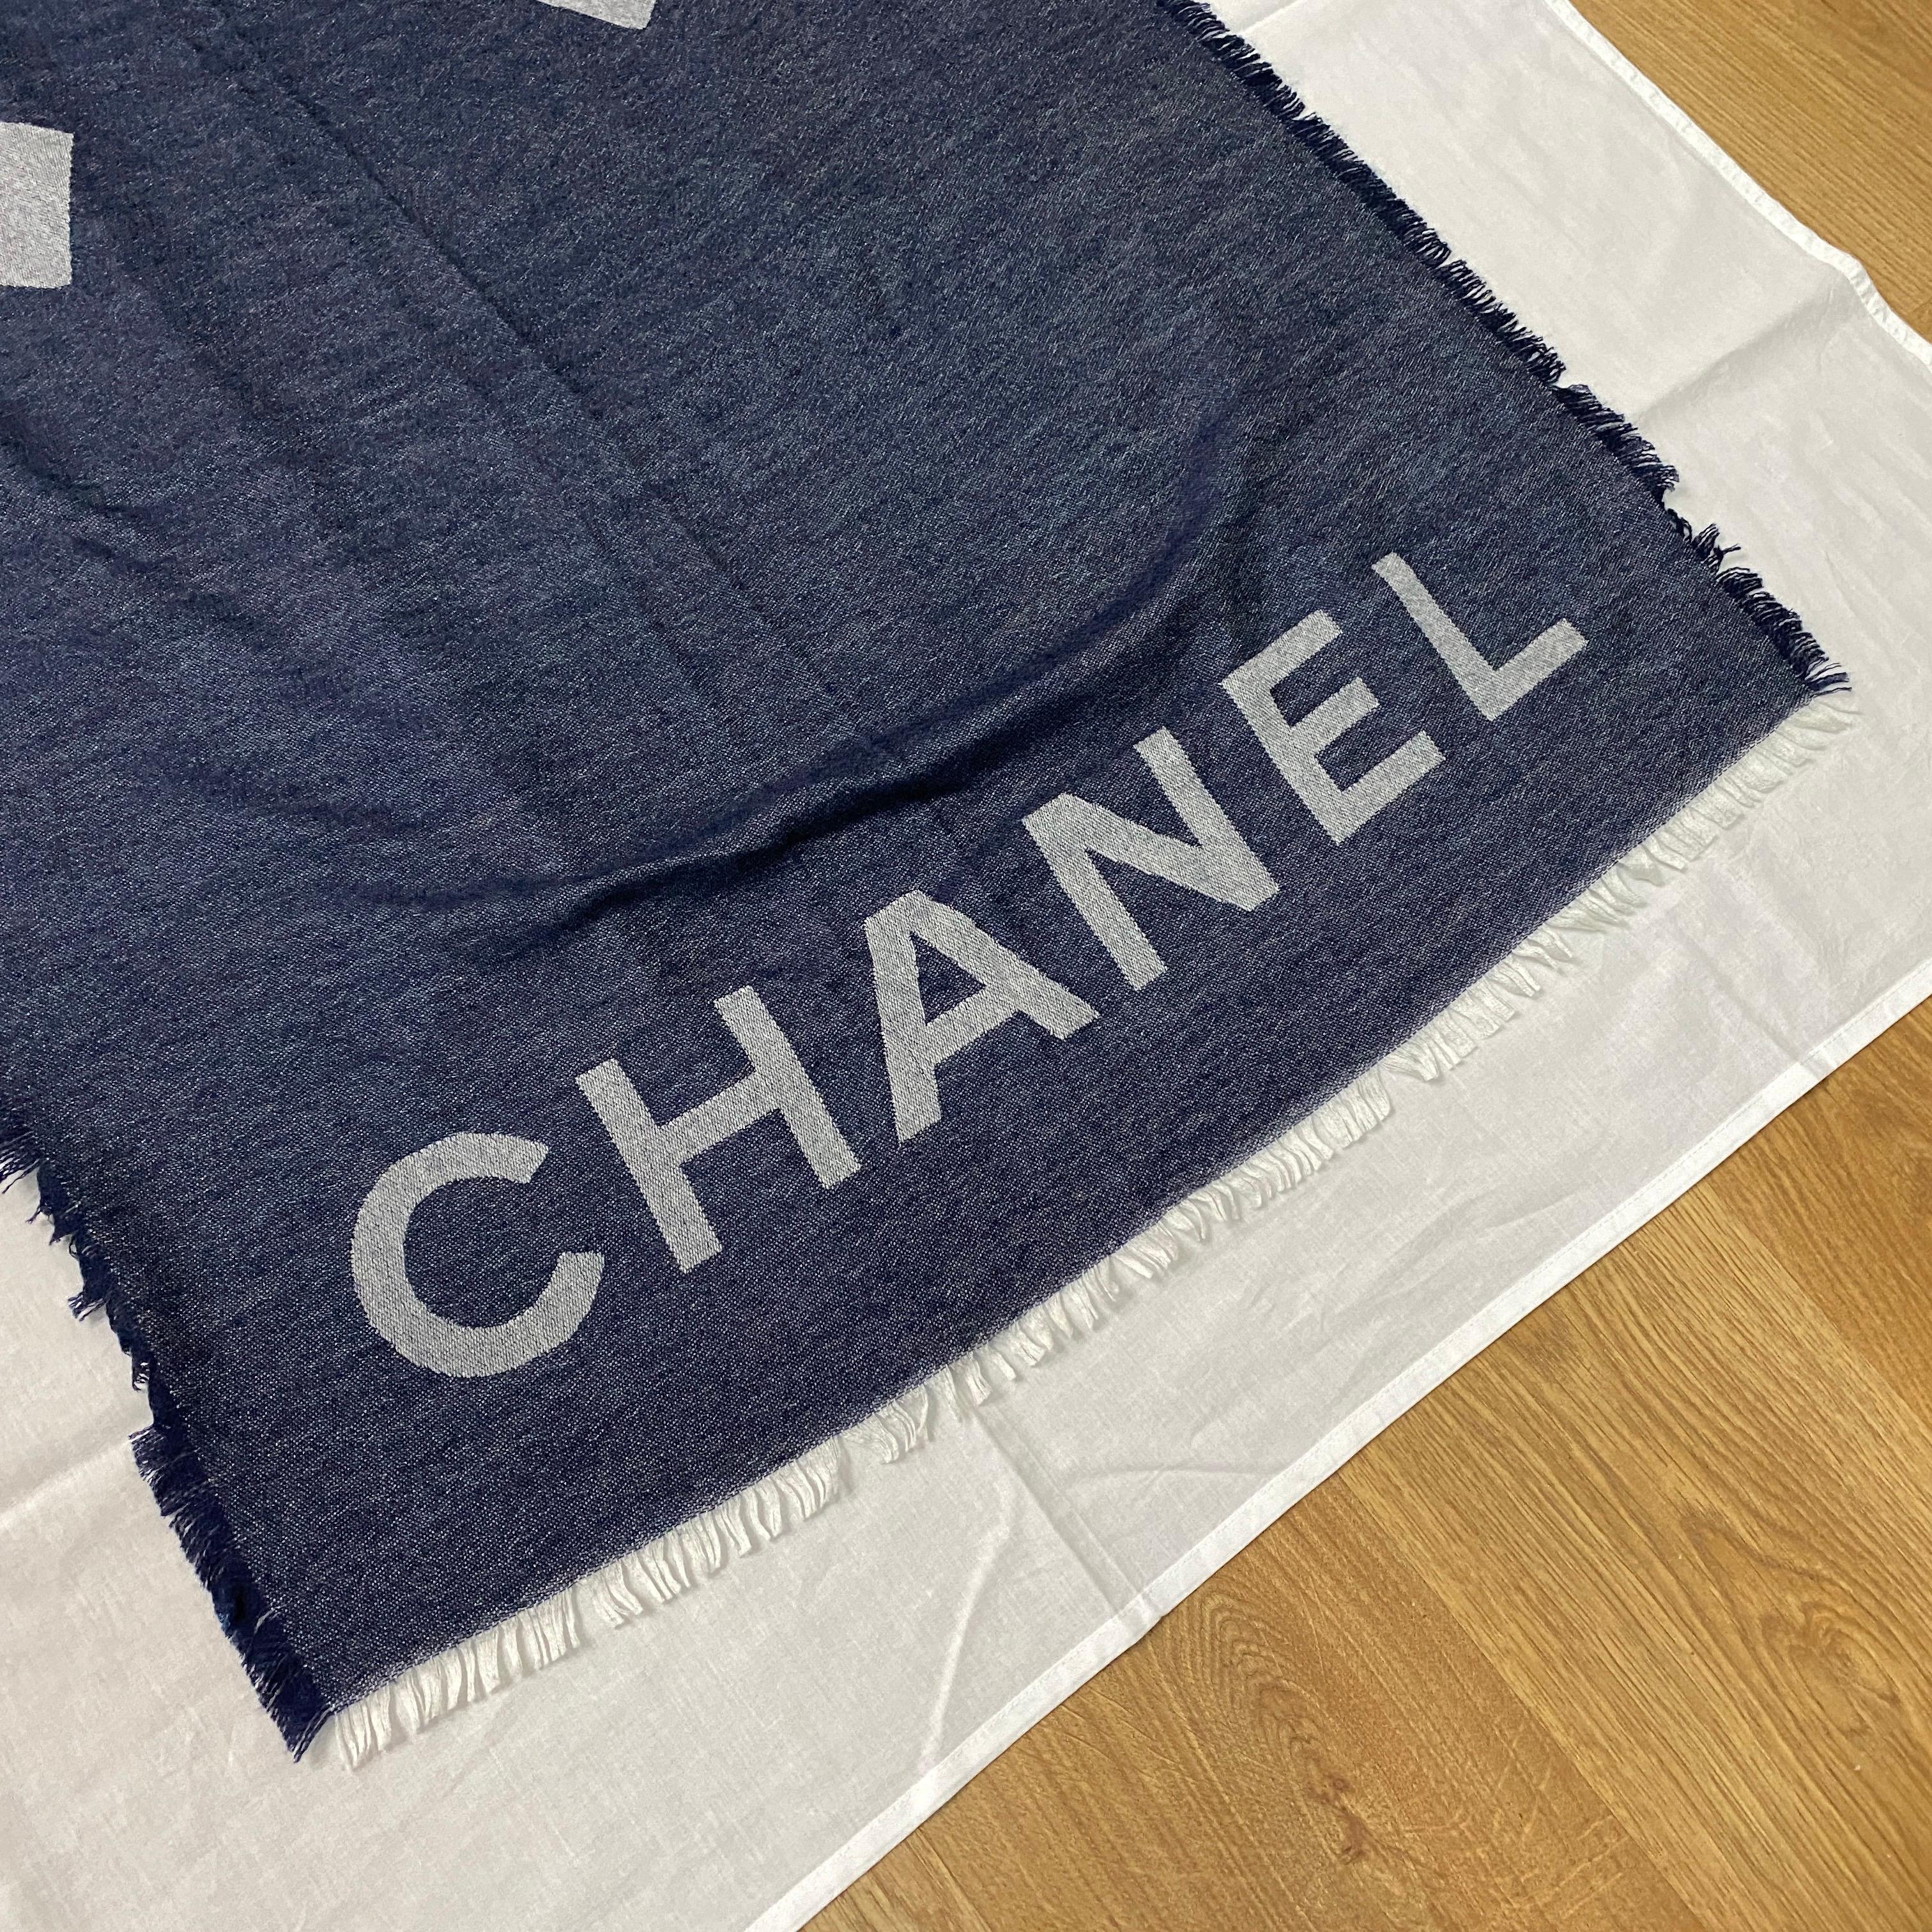 A Chanel cashmere and silk scarf, blue and gray, CC logo print on the front. 